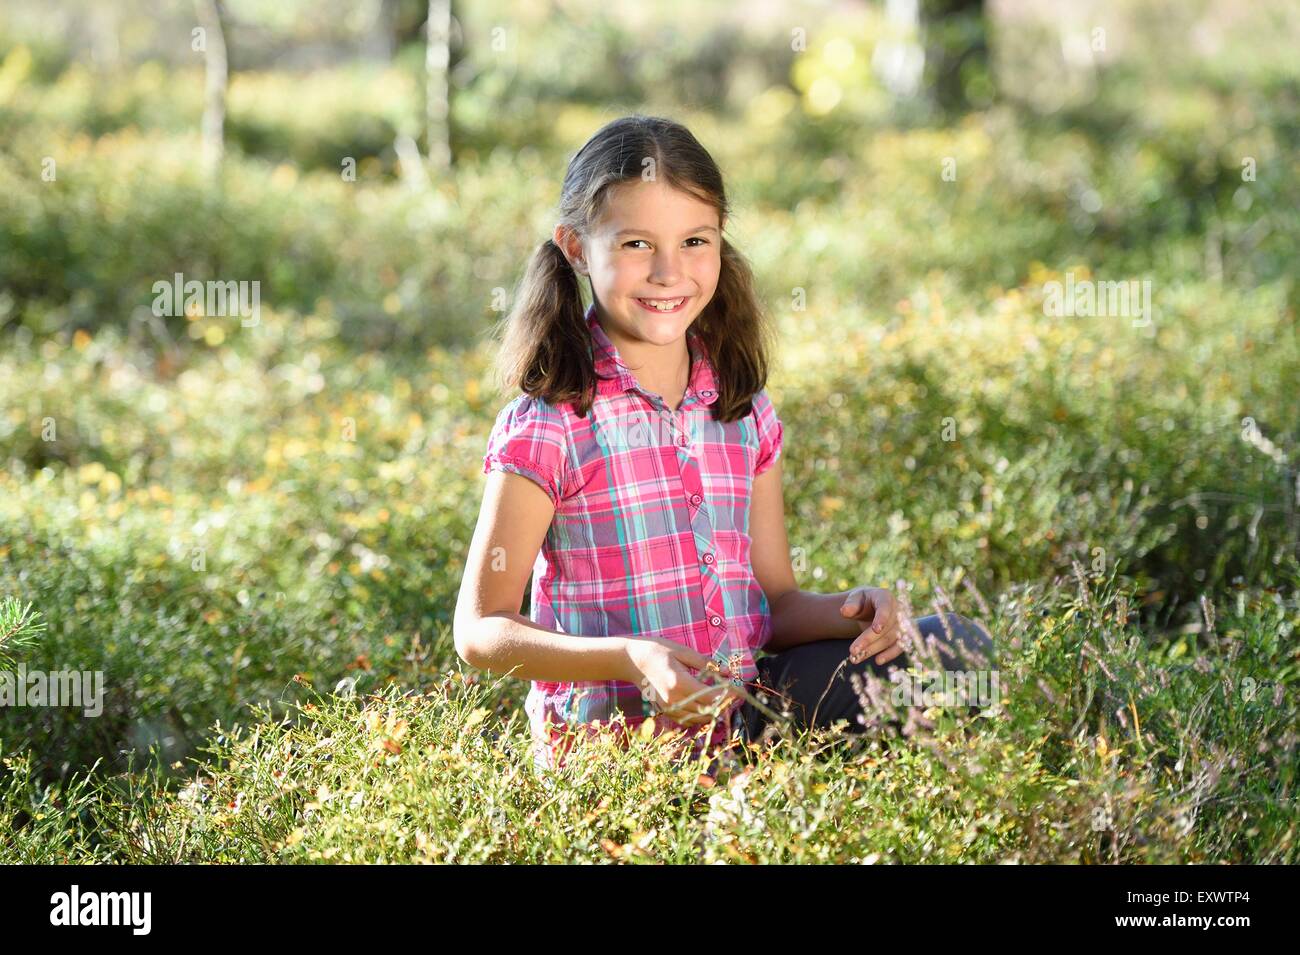 Girl eating berries in a pine forest Stock Photo